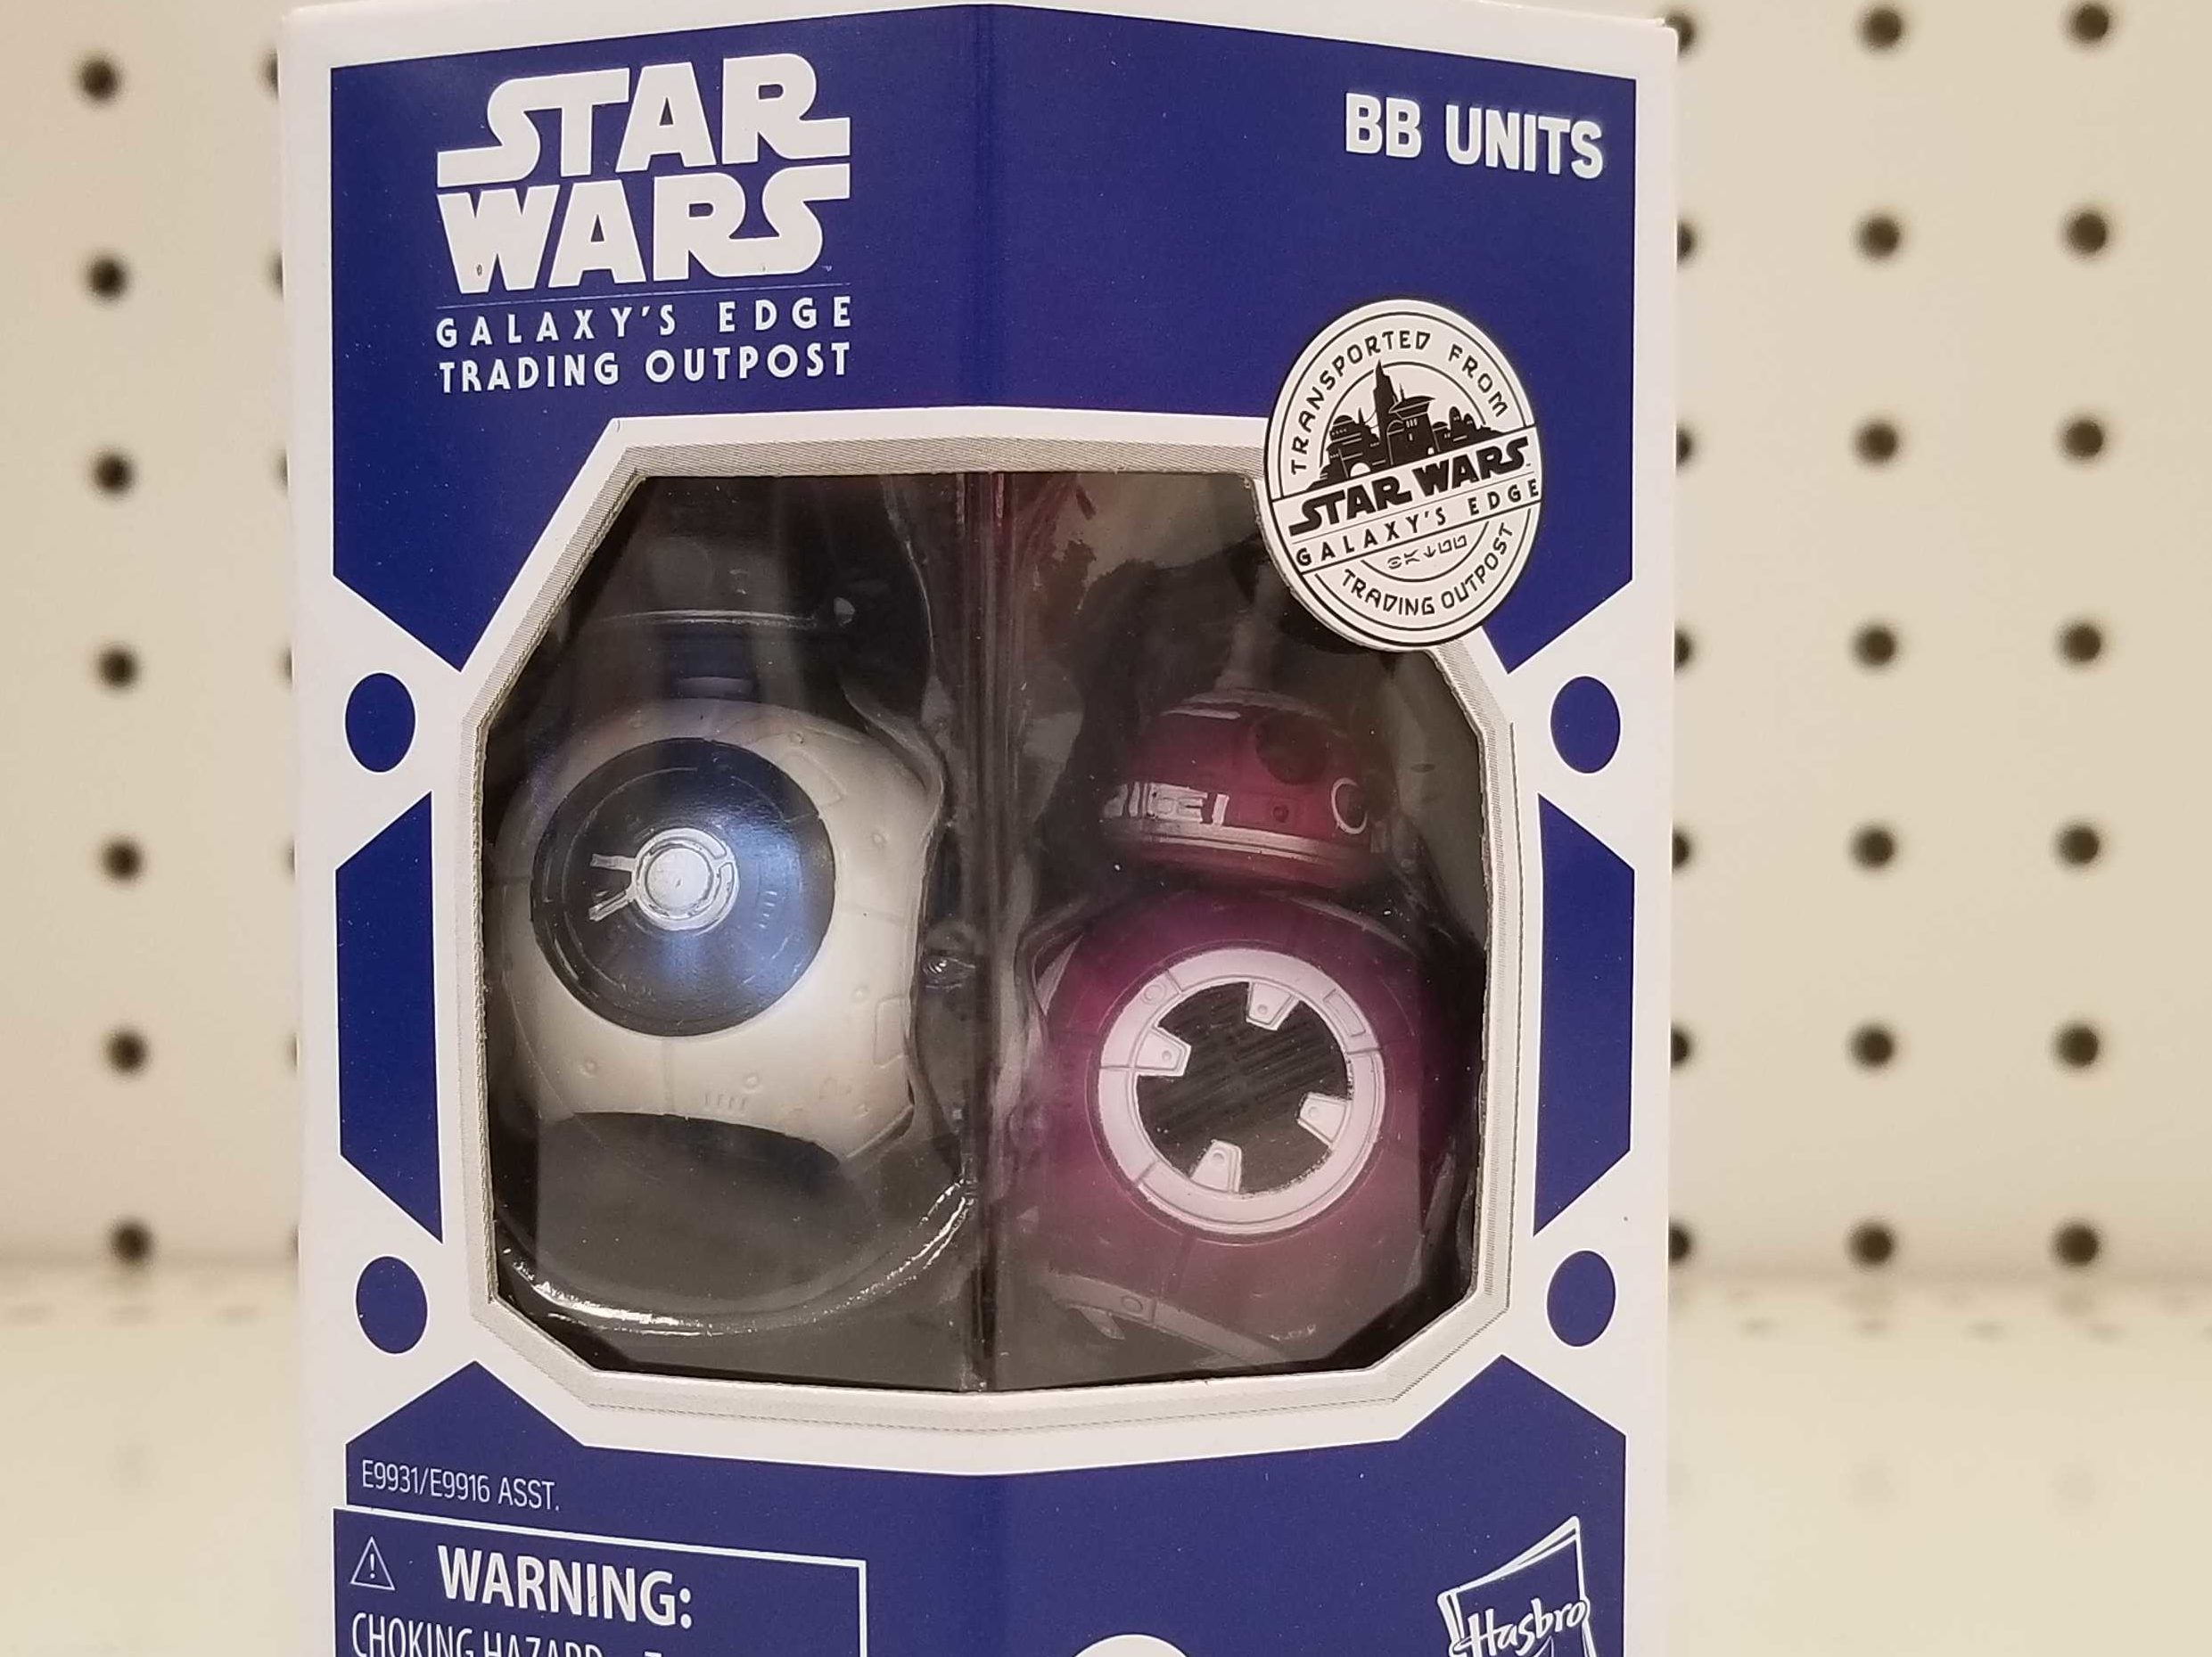 White and Purple Target Star Wars Galaxy/'s Edge Trading Outpost BB Units